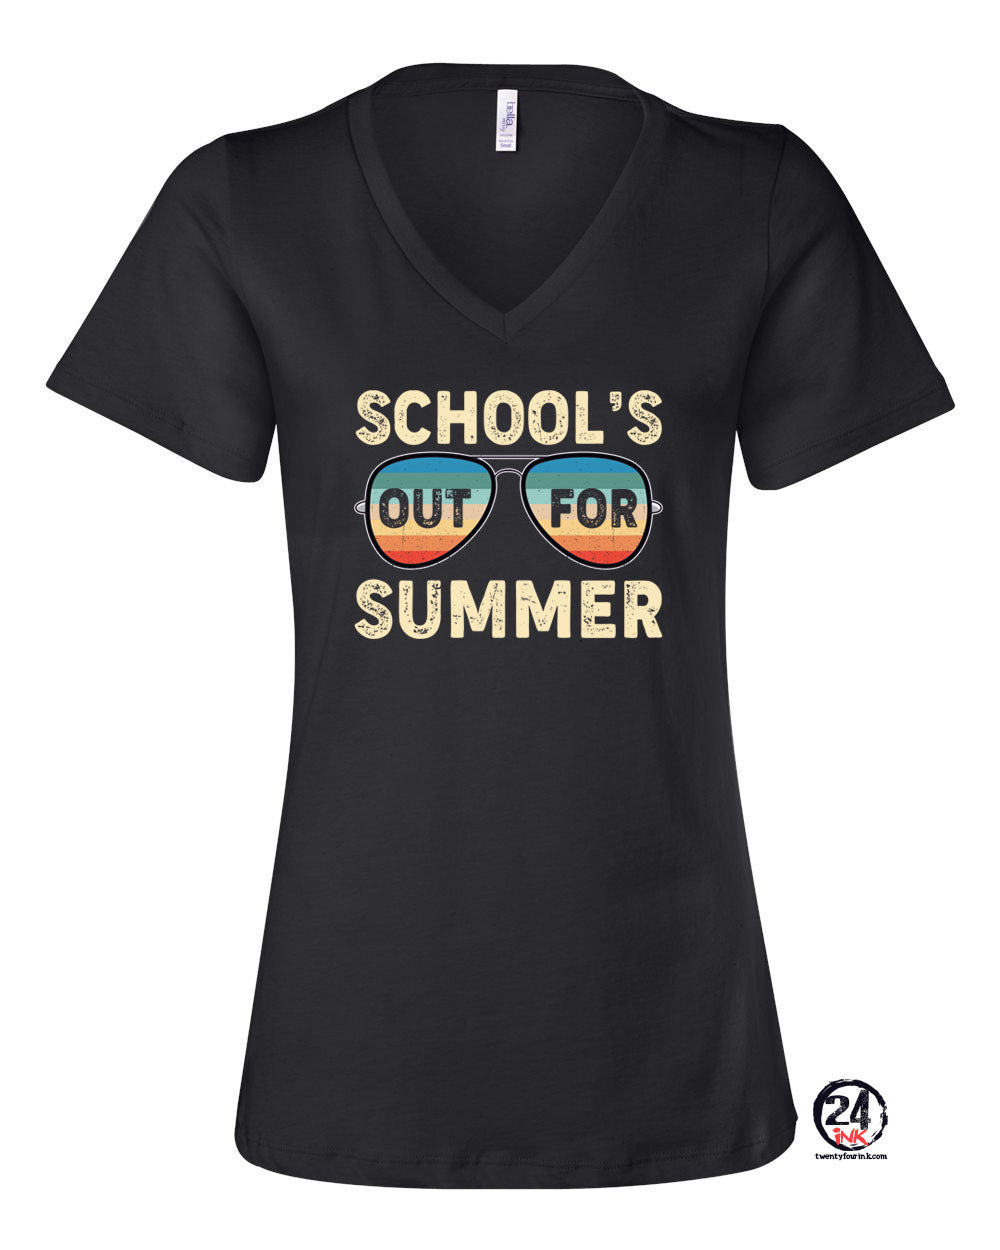 School's Out V-neck T-shirt